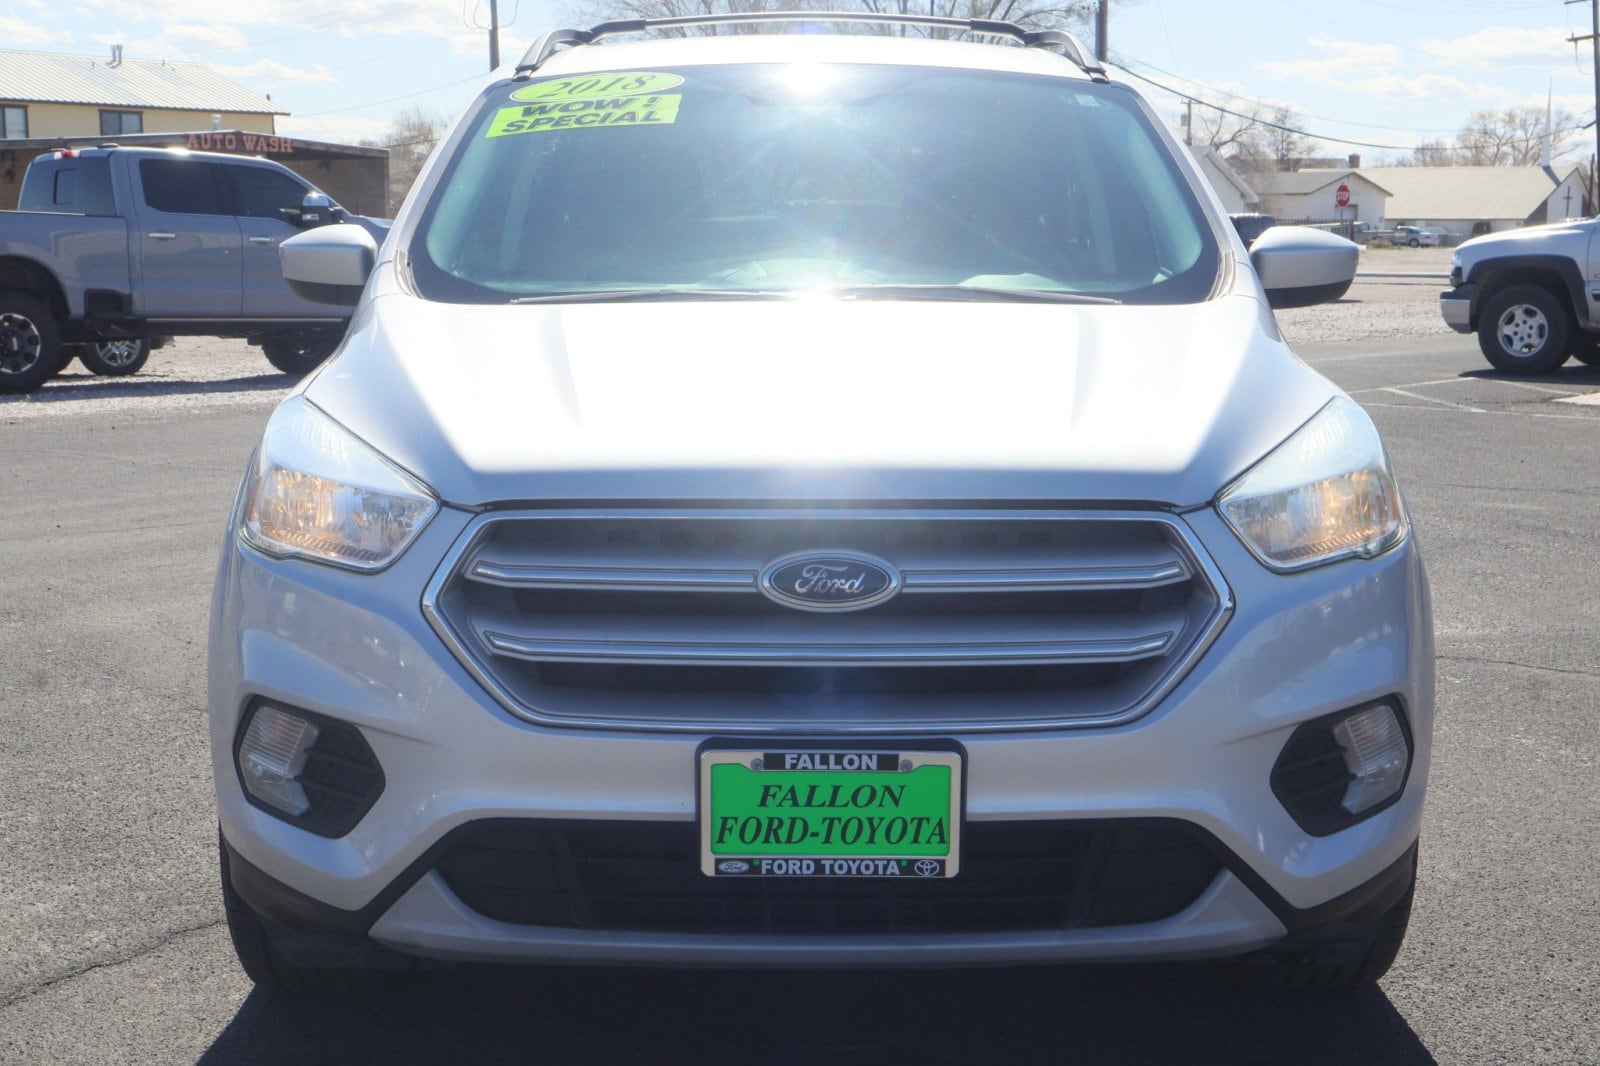 Used 2018 Ford Escape SE with VIN 1FMCU9GD7JUA75296 for sale in Fallon, NV